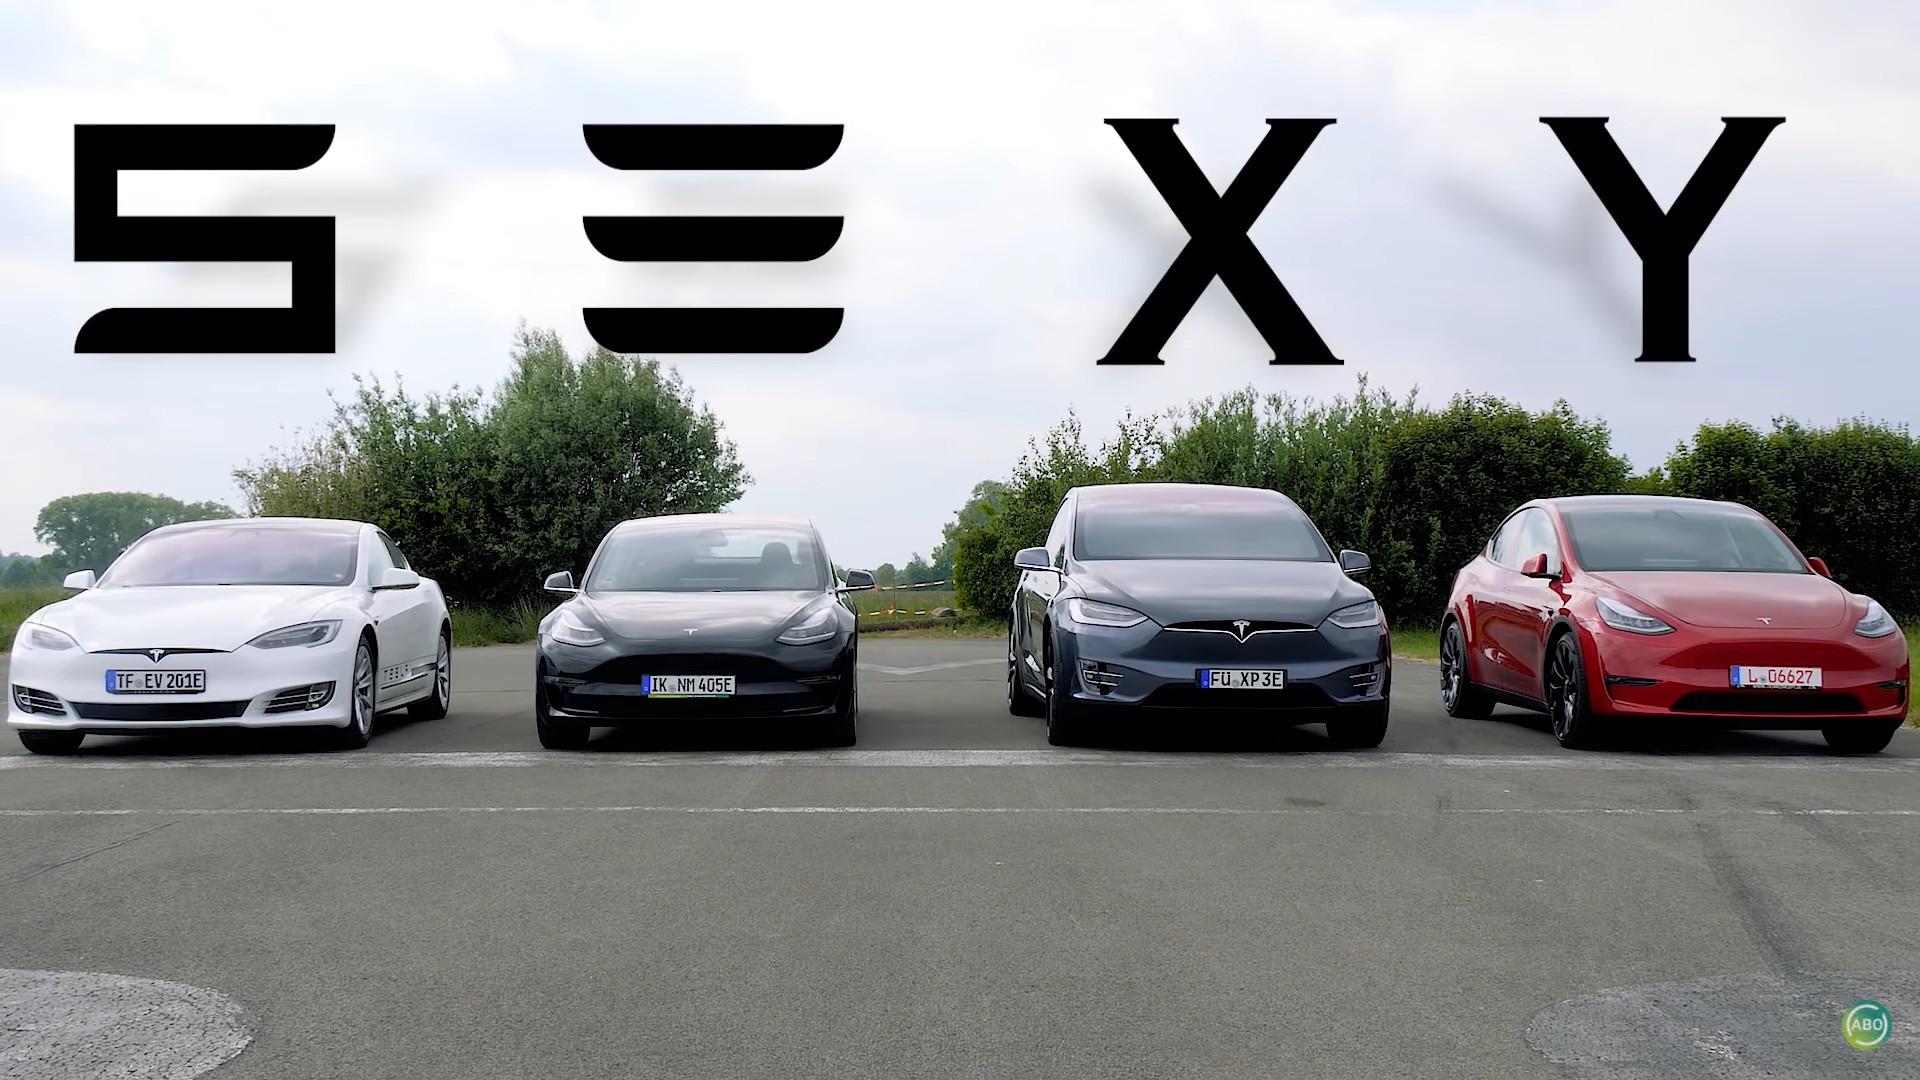 Airfield Model Y and S, 3, X Race Has Predictable Raven Outcome - autoevolution